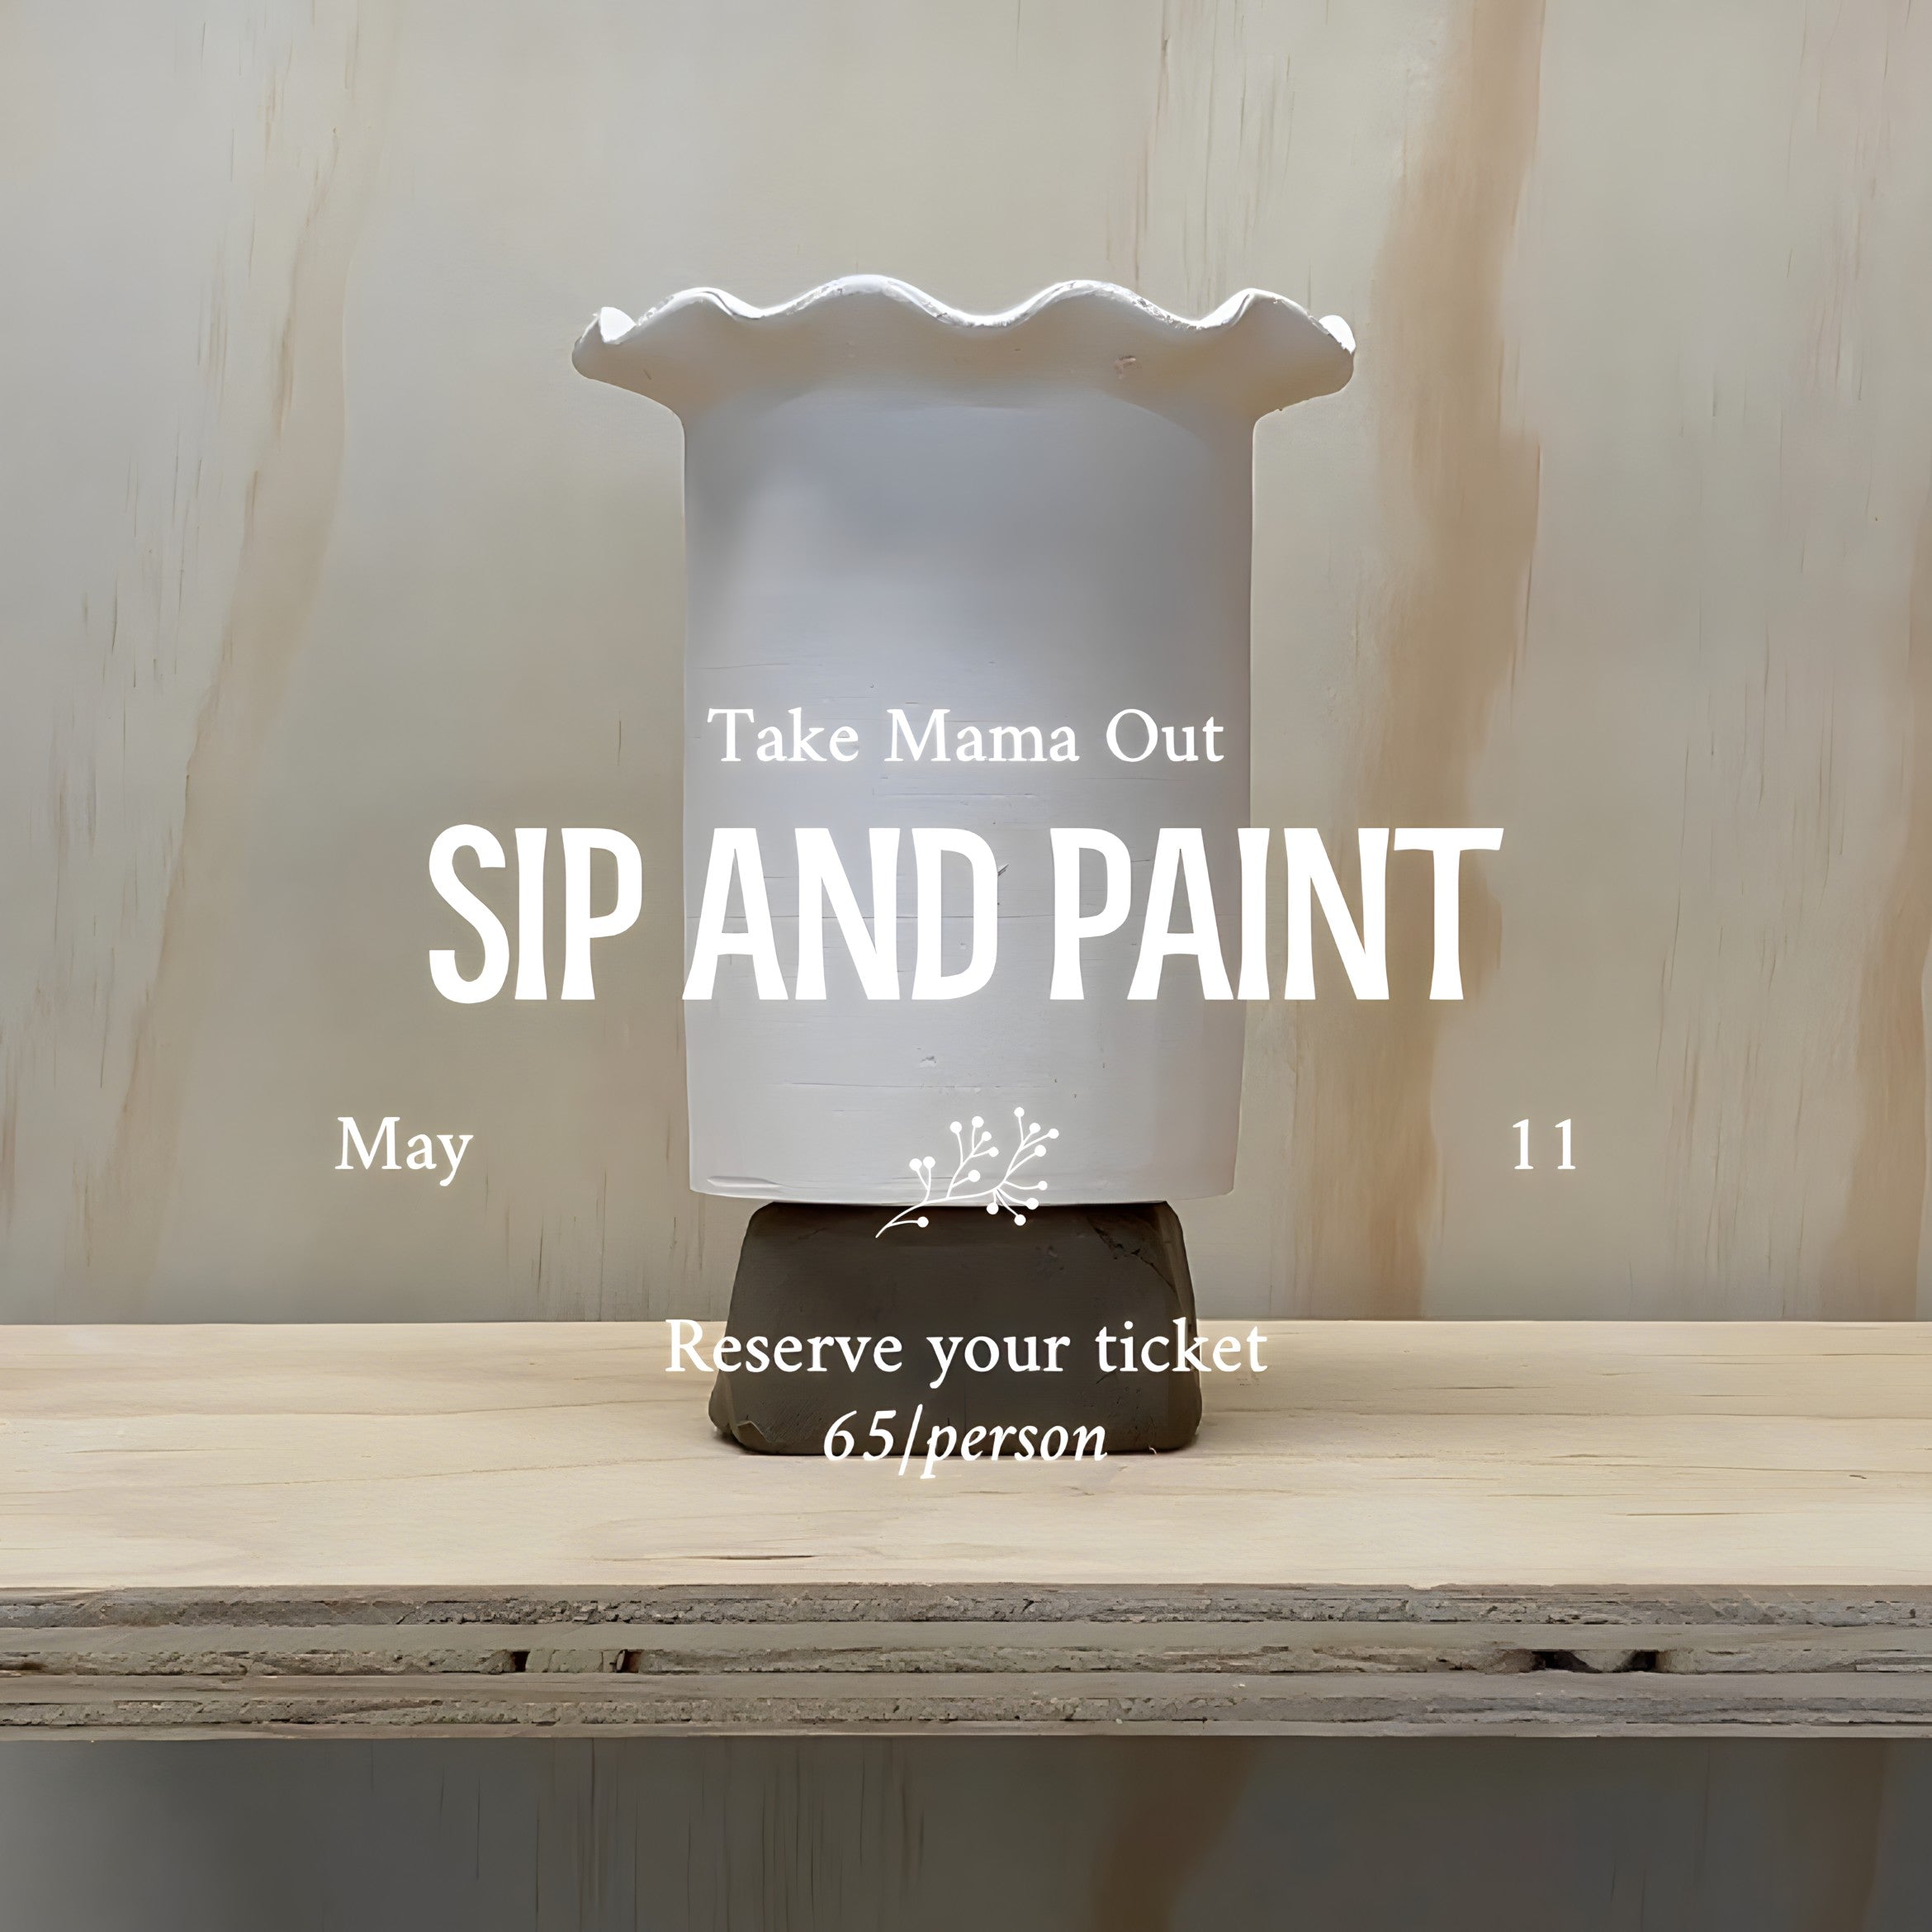 Sip and Paint - Take Mama Out